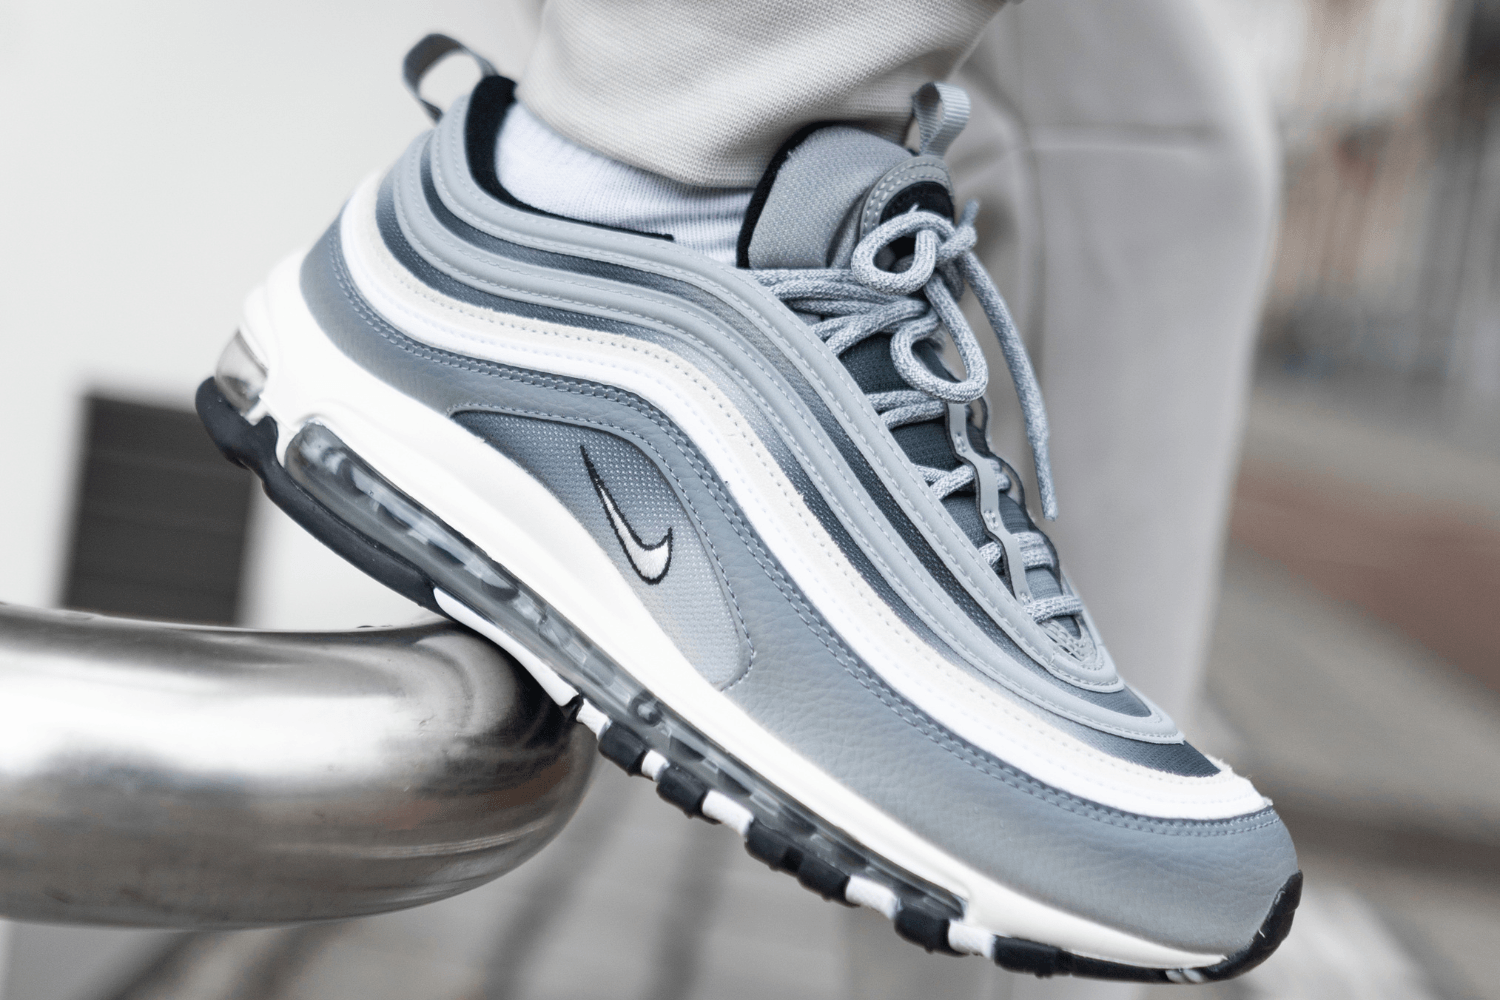 Nike Air Max 97 'Cool Grey' available exclusively at Snipes